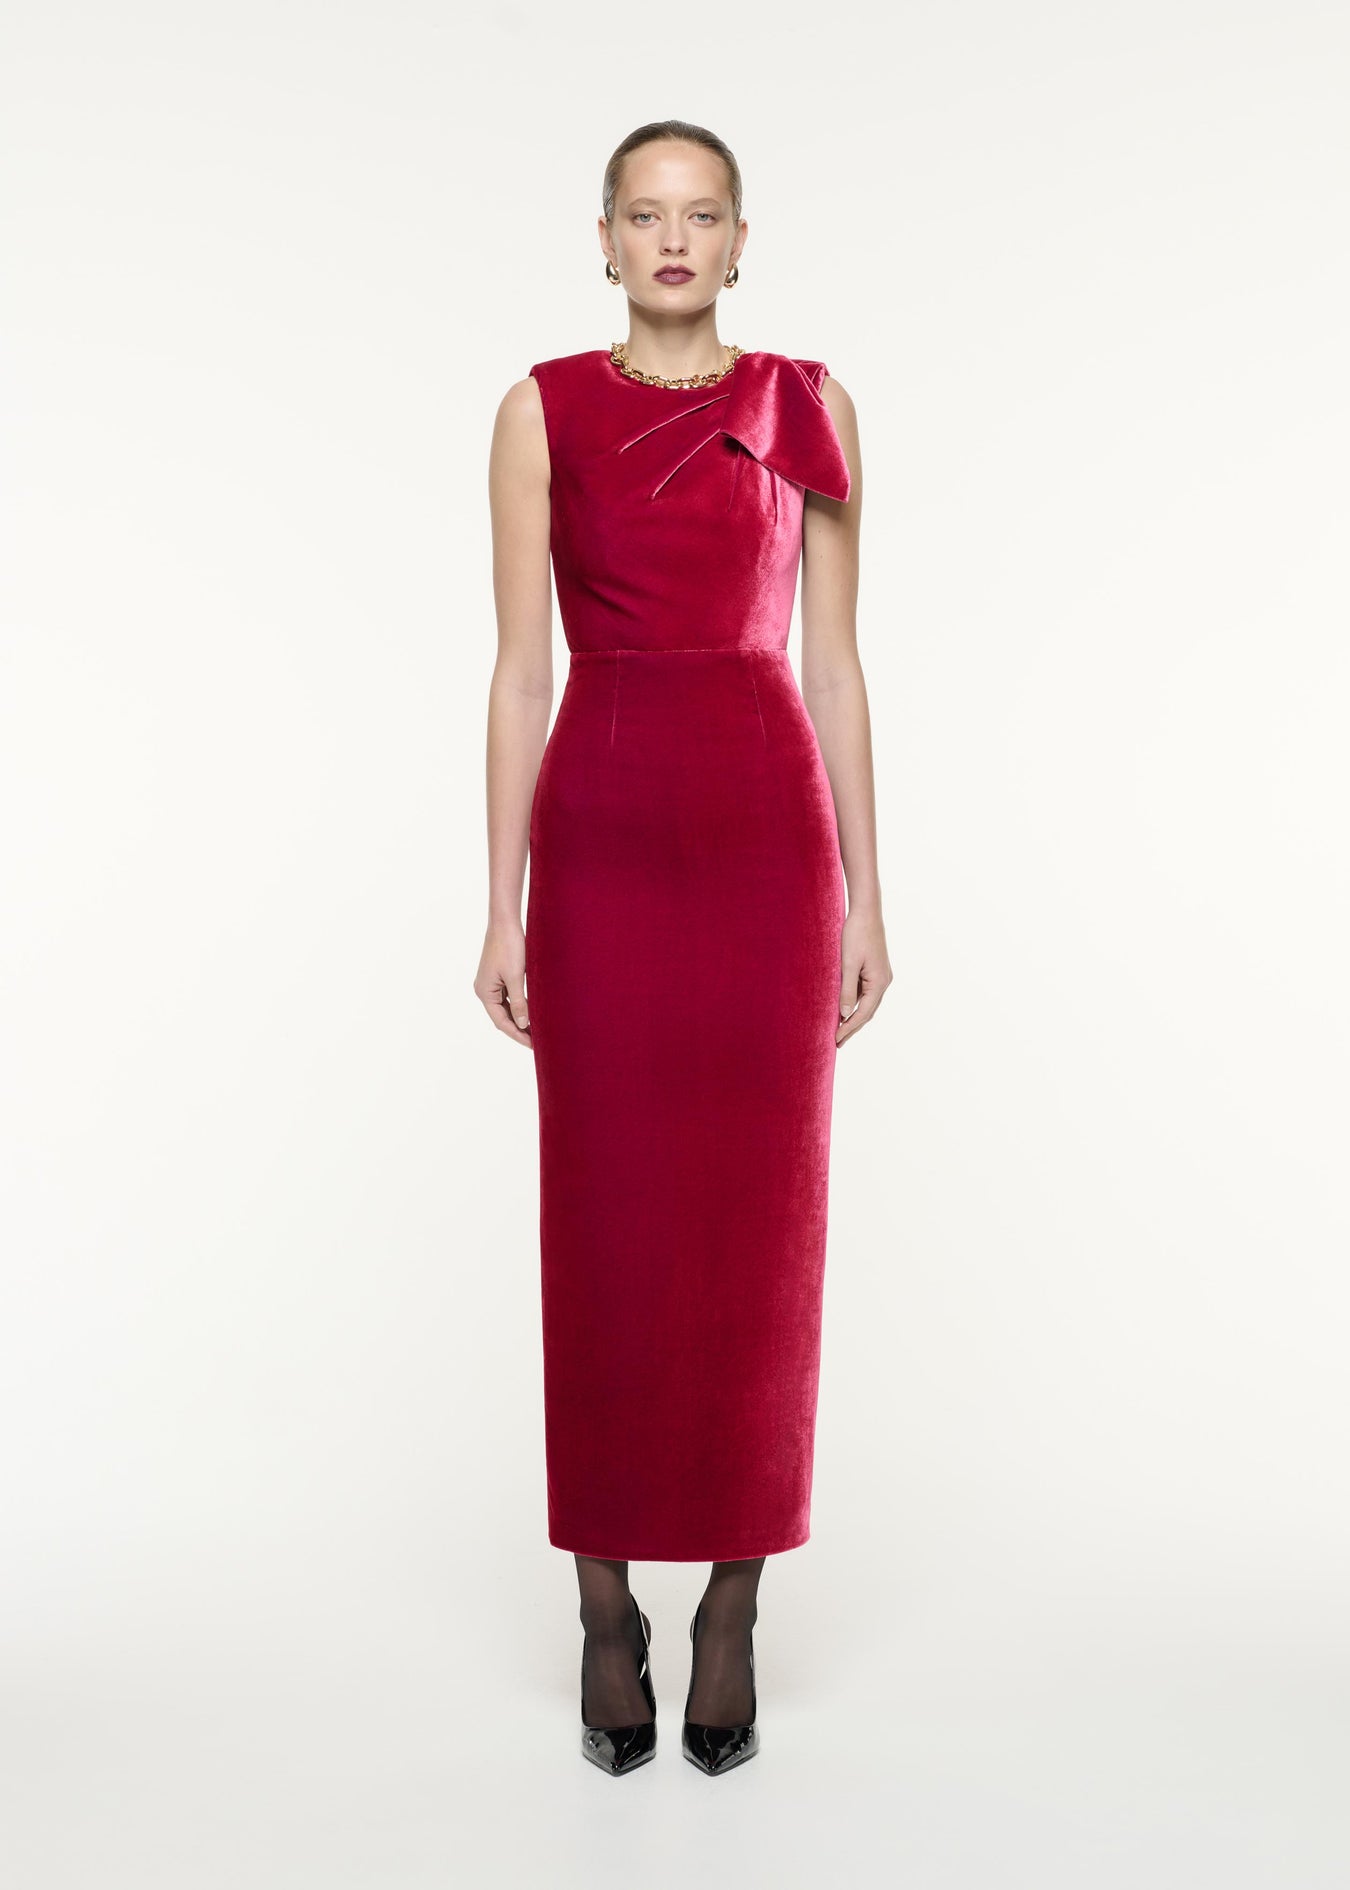 A front view image of a model wearing the Velvet Bow Maxi Dress in Pink